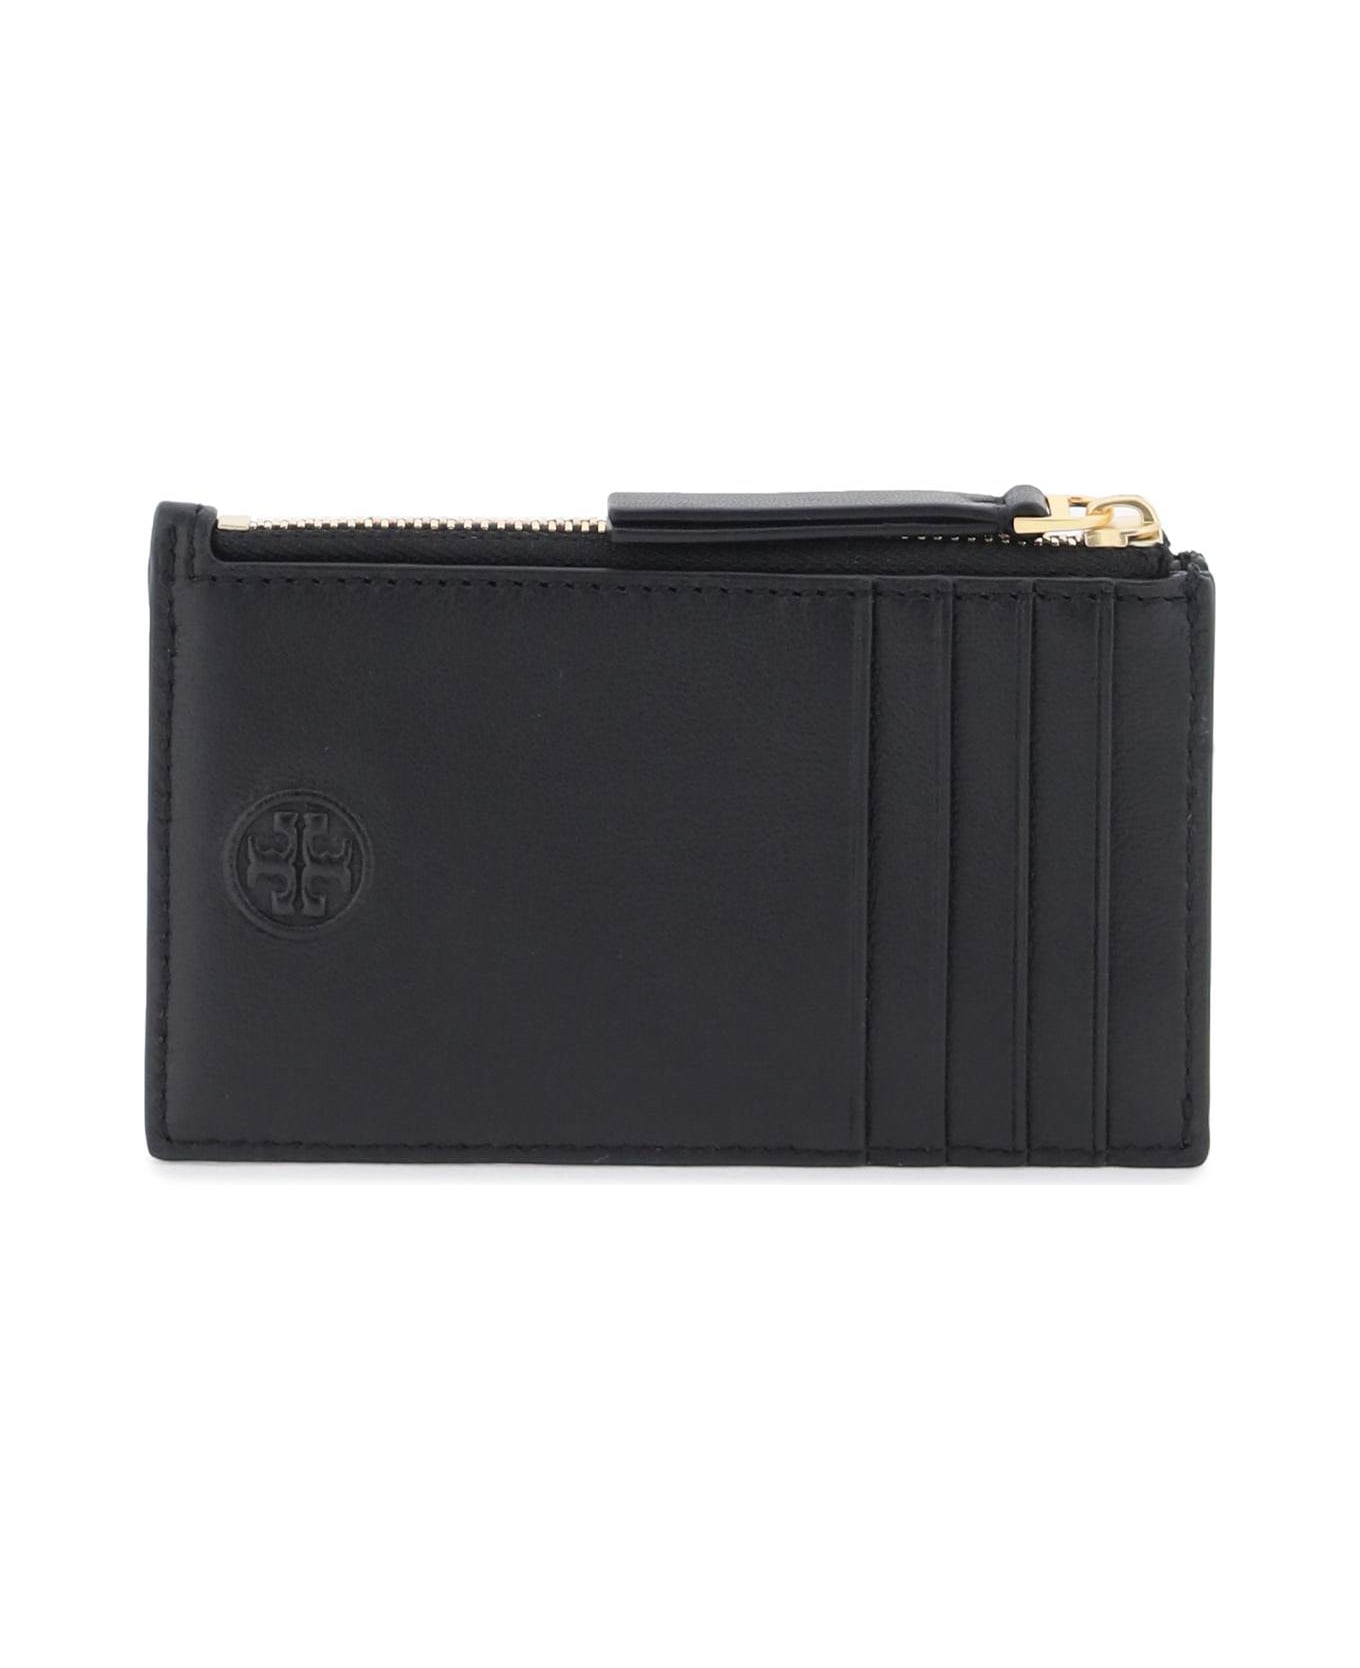 Tory Burch Smooth Leather Card Holder - Black